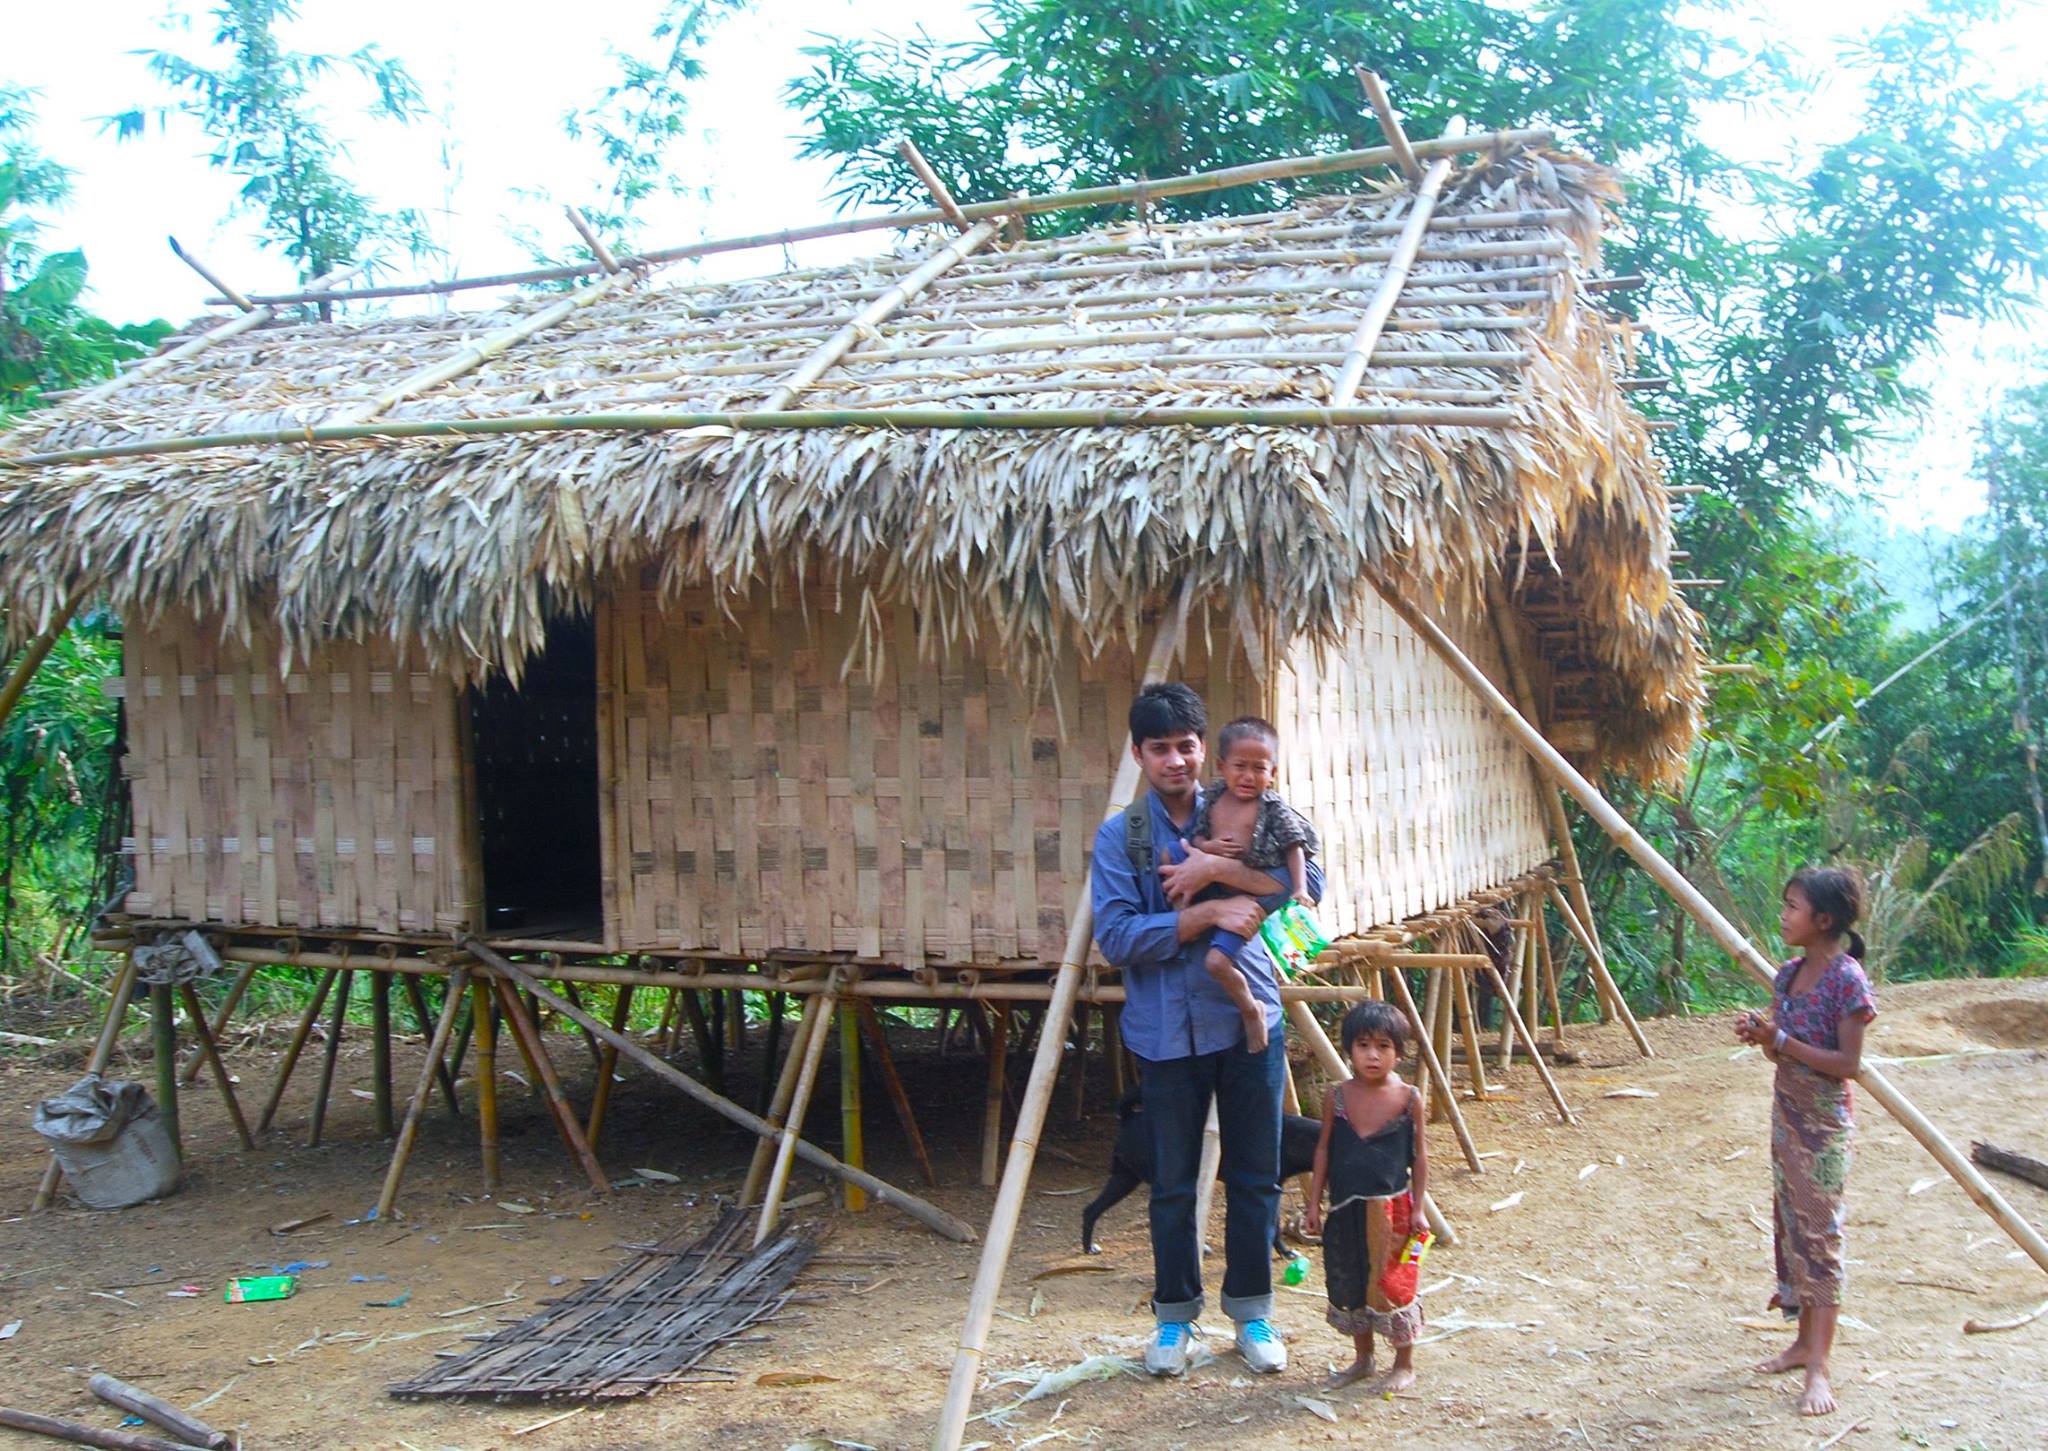 Me in front of a Tribal House, Khagrachari Hill tracts, Bangladesh